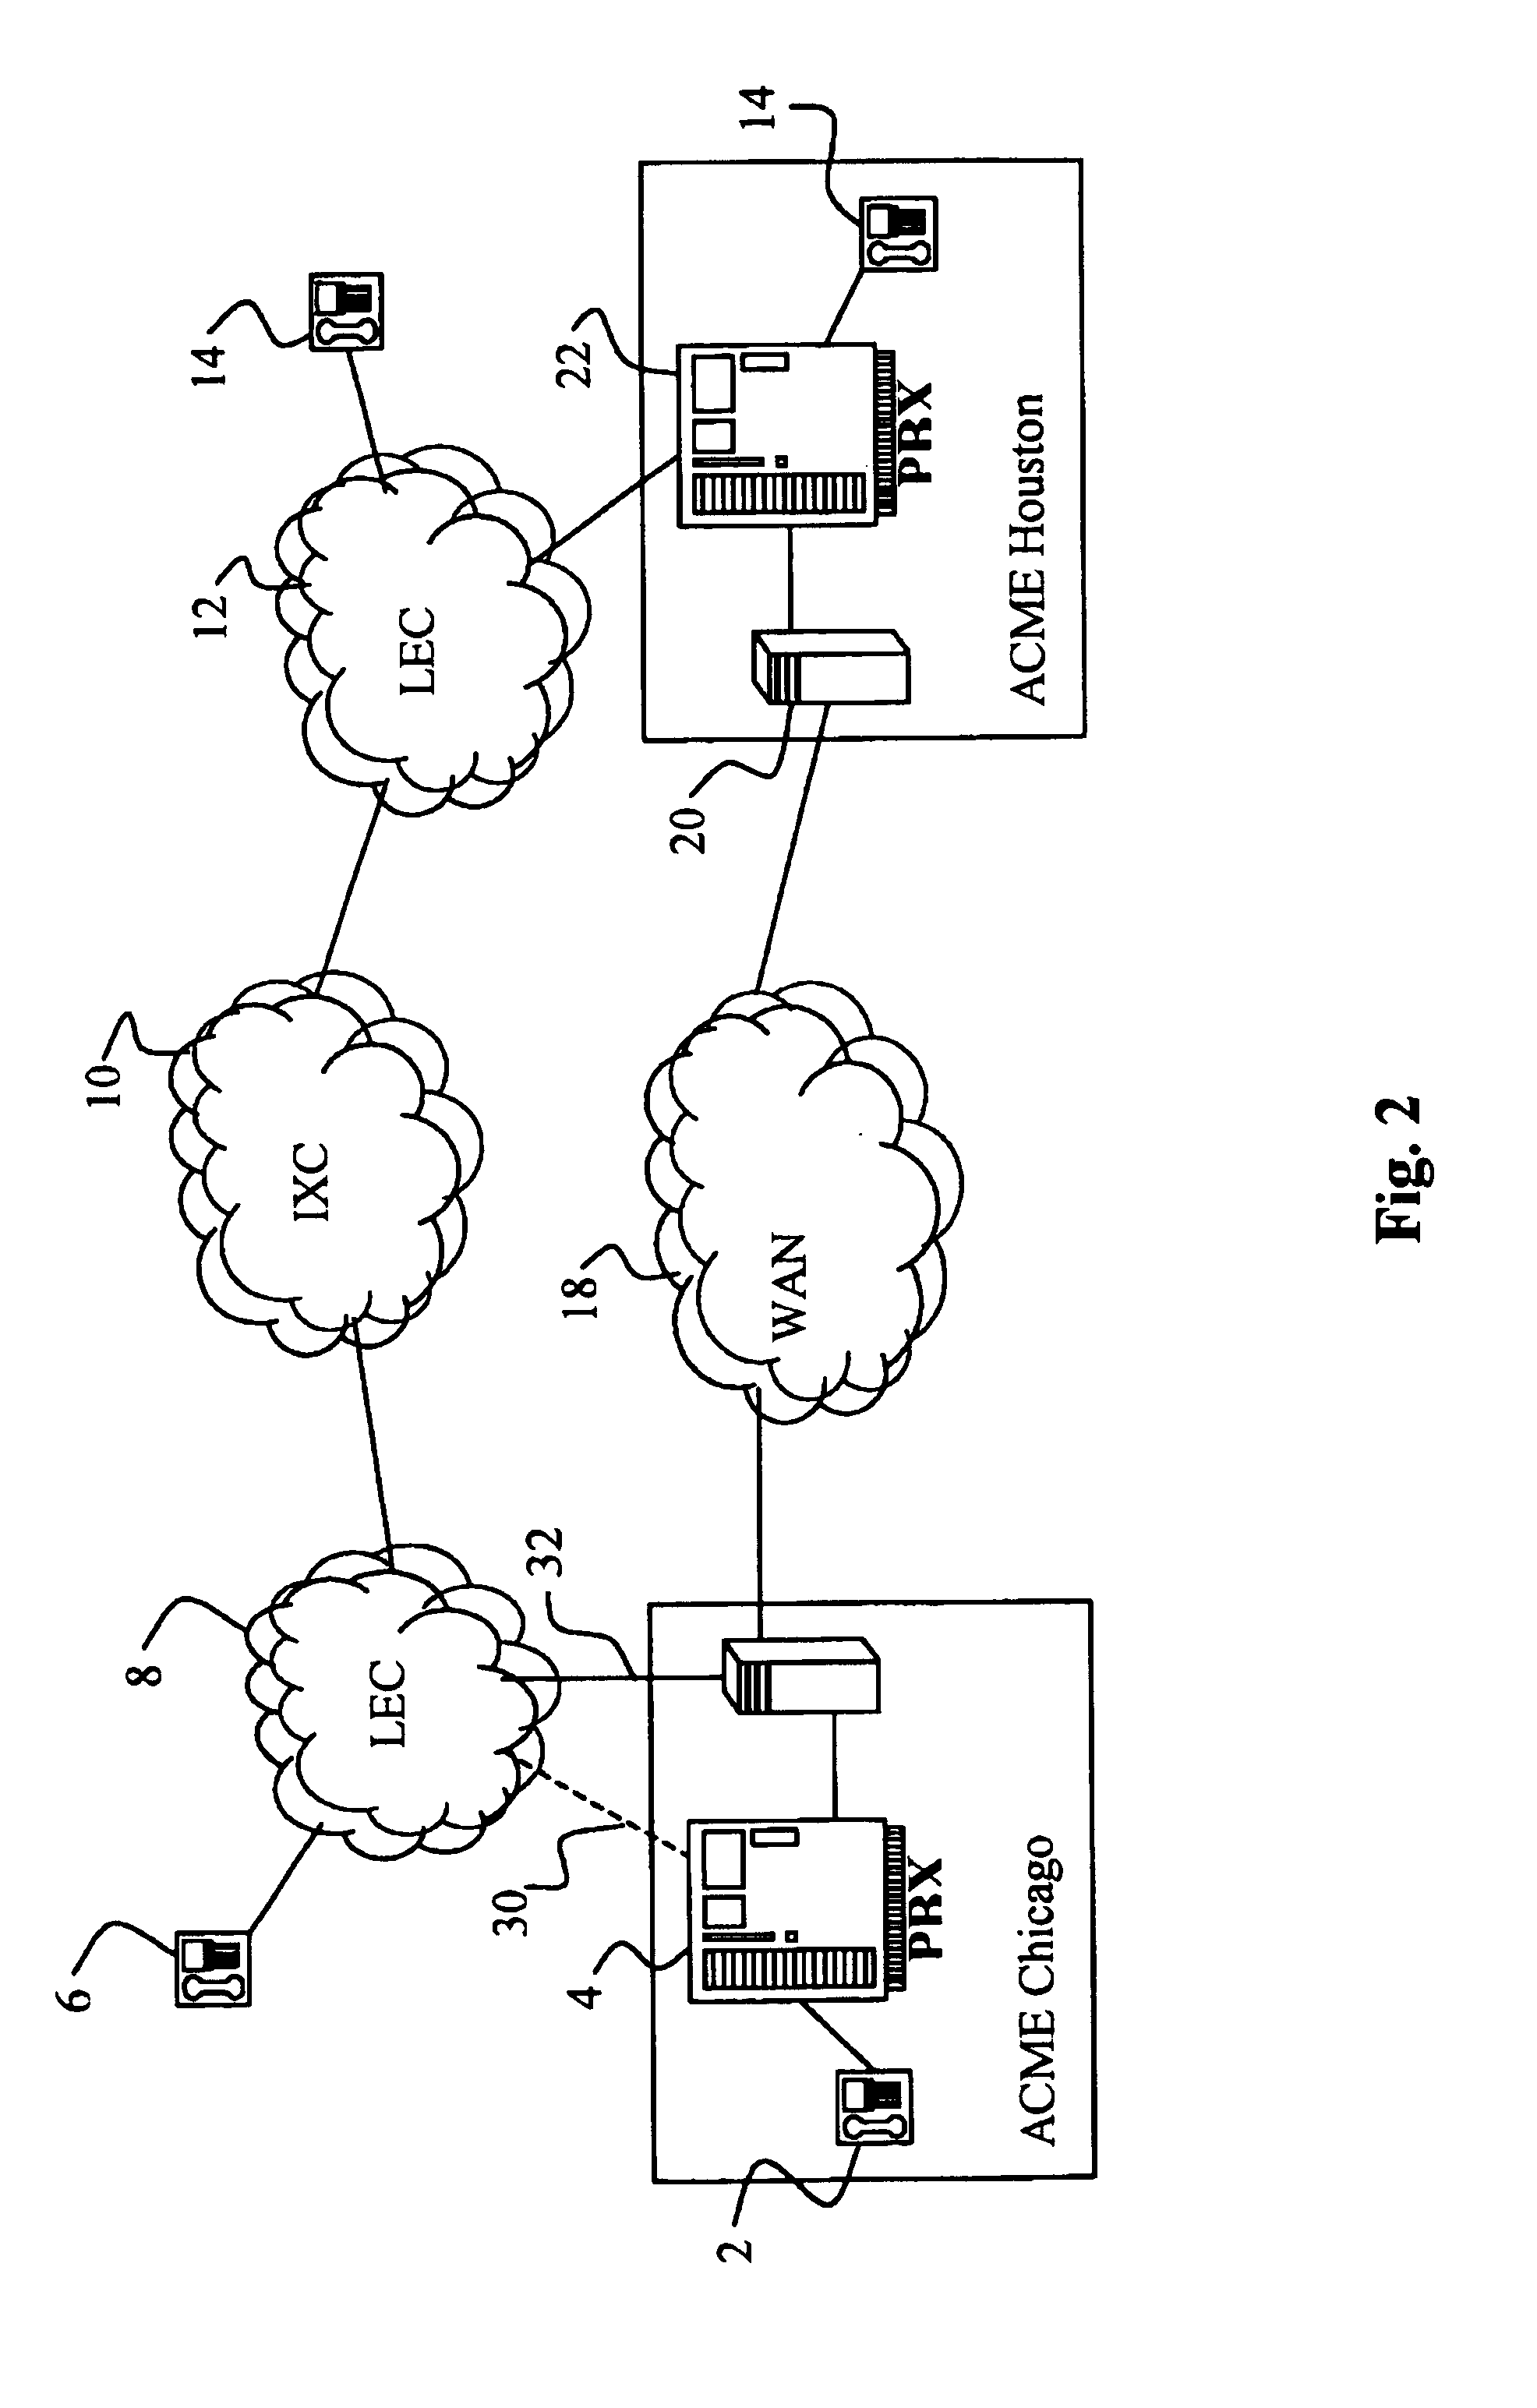 Method and dial plan for packet based voice communications functionality